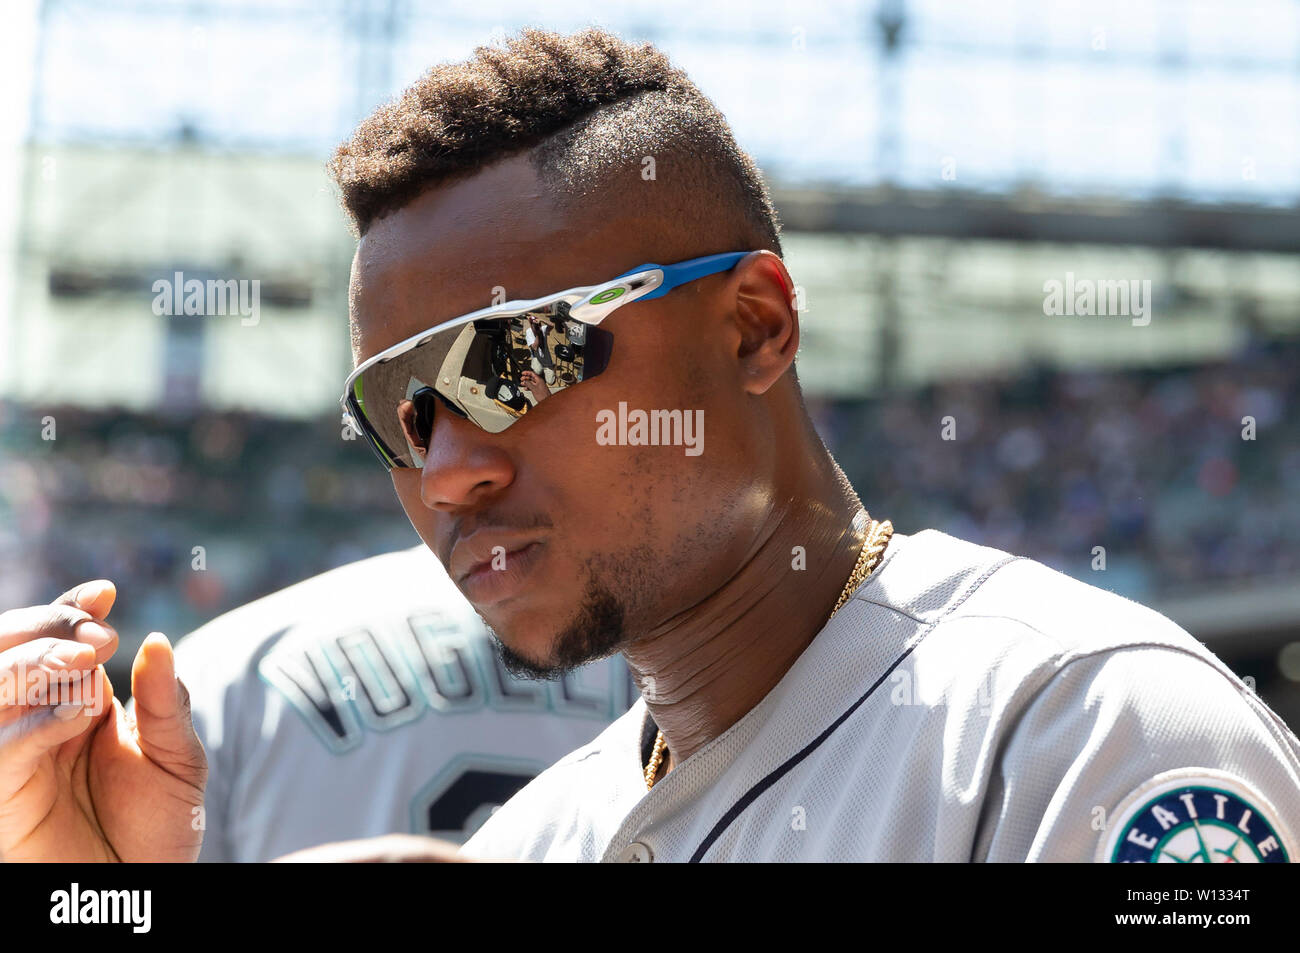 milwaukee wi usa 27th june 2019 seattle mariners shortstop tim beckham 1 wearing oakley sunglasses during the major league baseball game between the milwaukee brewers and the seattle mariners at miller park in milwaukee wi john fishercsmalamy live news W1334T